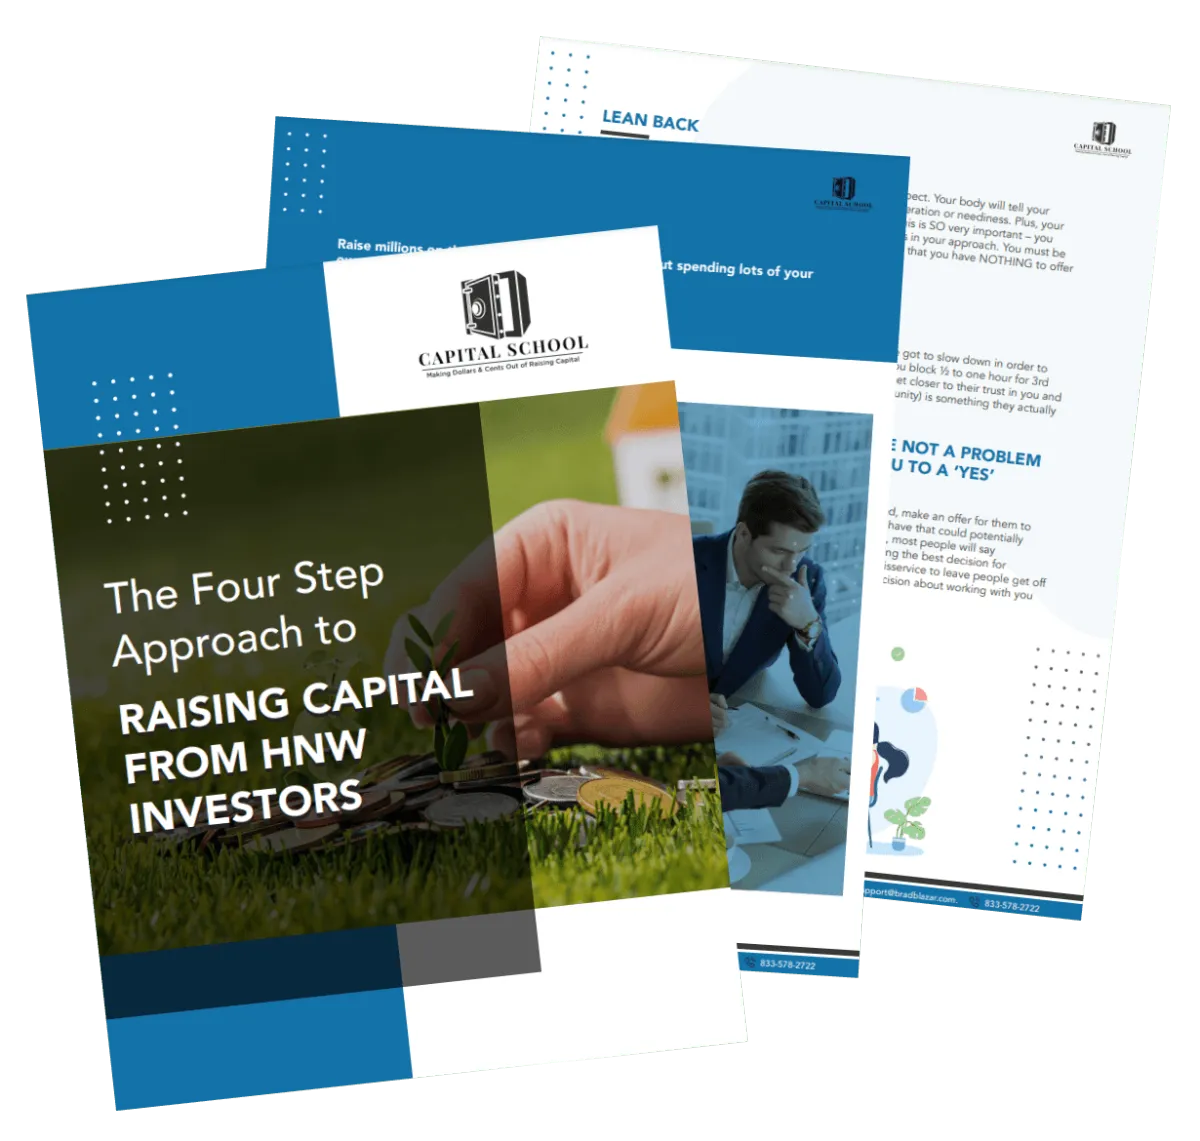 the four step approach to raising capital from high net worth investors